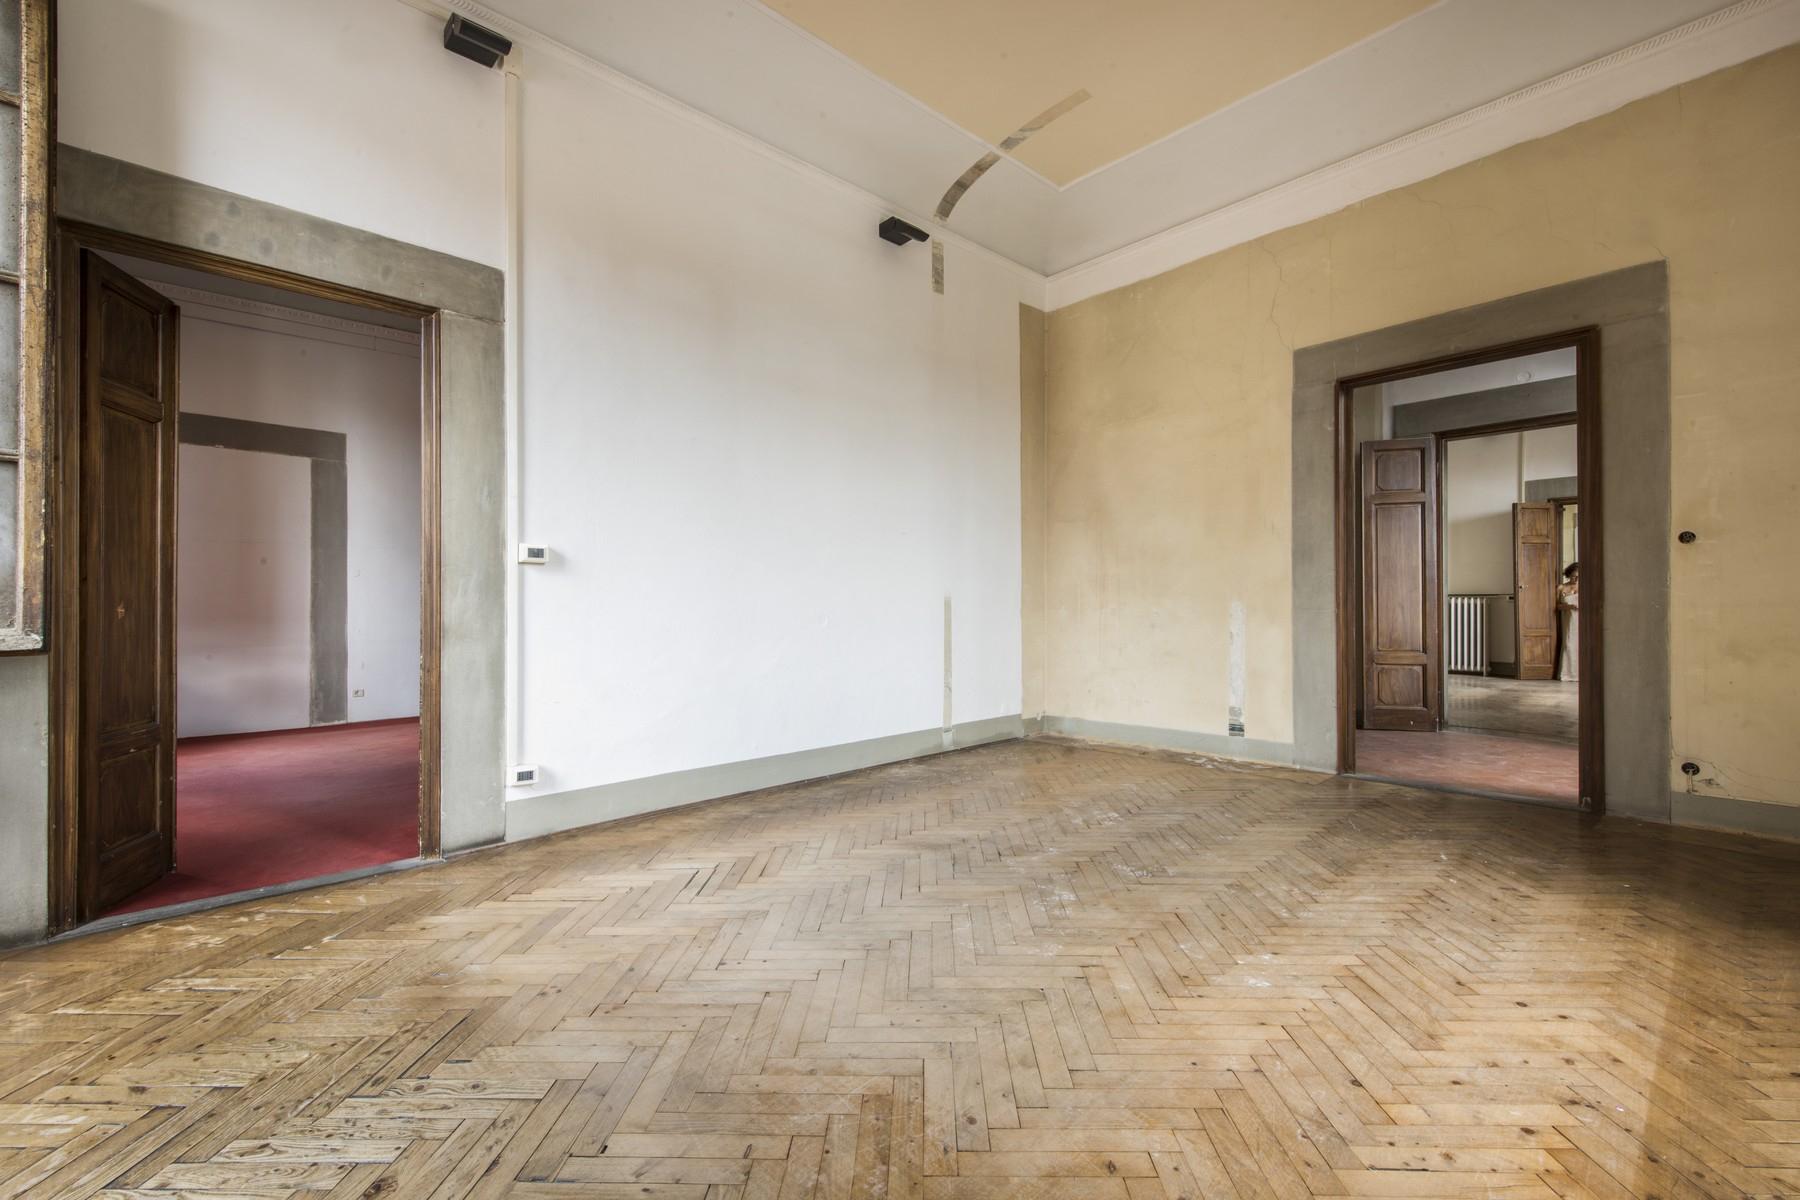 Magnificent 520sqm penthouse in a historic Florentine palazzo. - 8